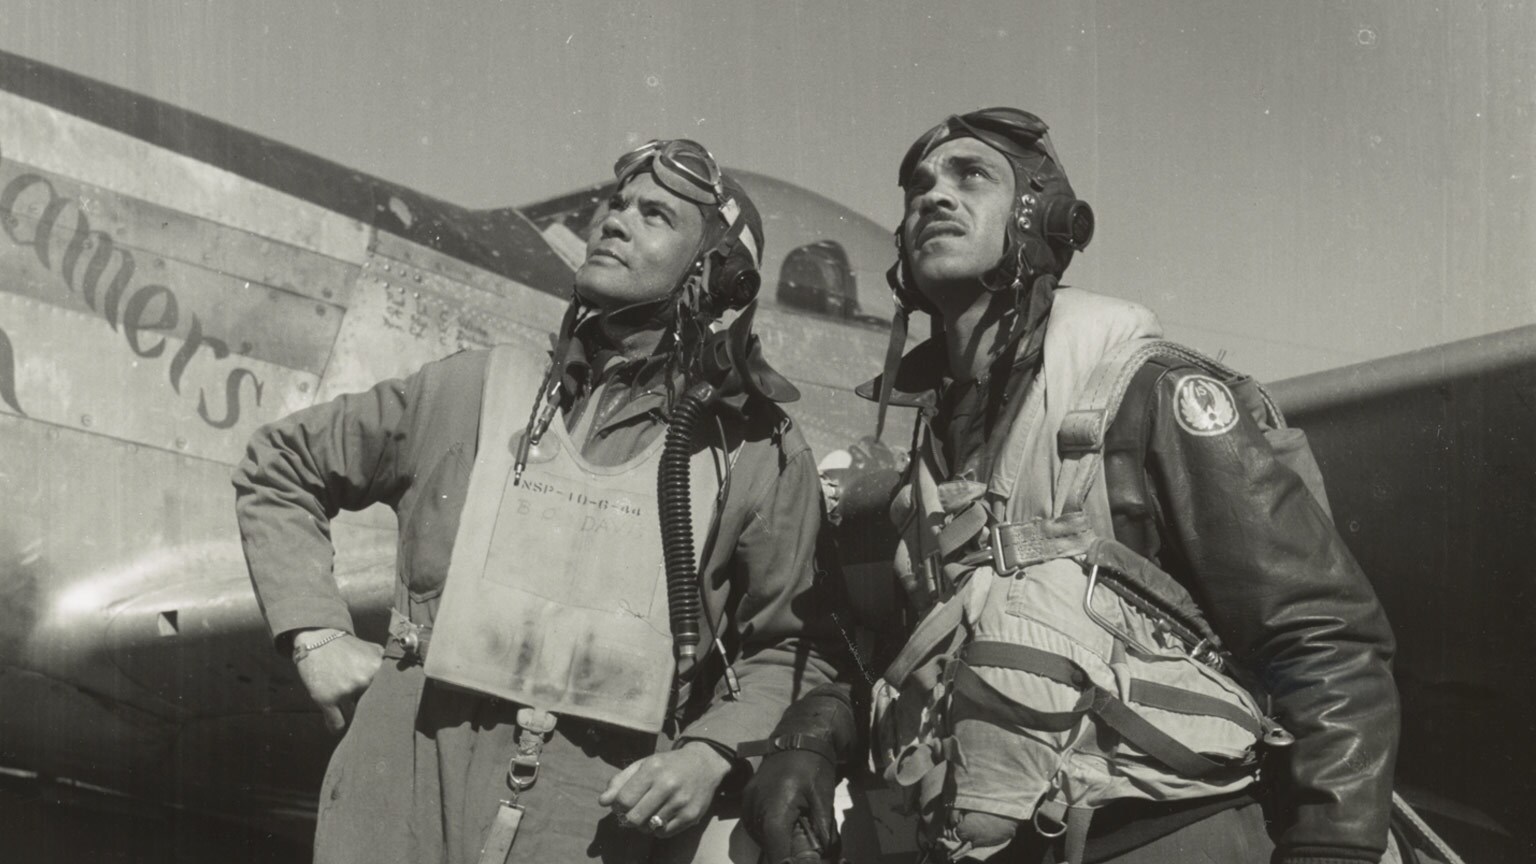 Learn the Story of the Tuskegee Airmen at Lucasfilm.com